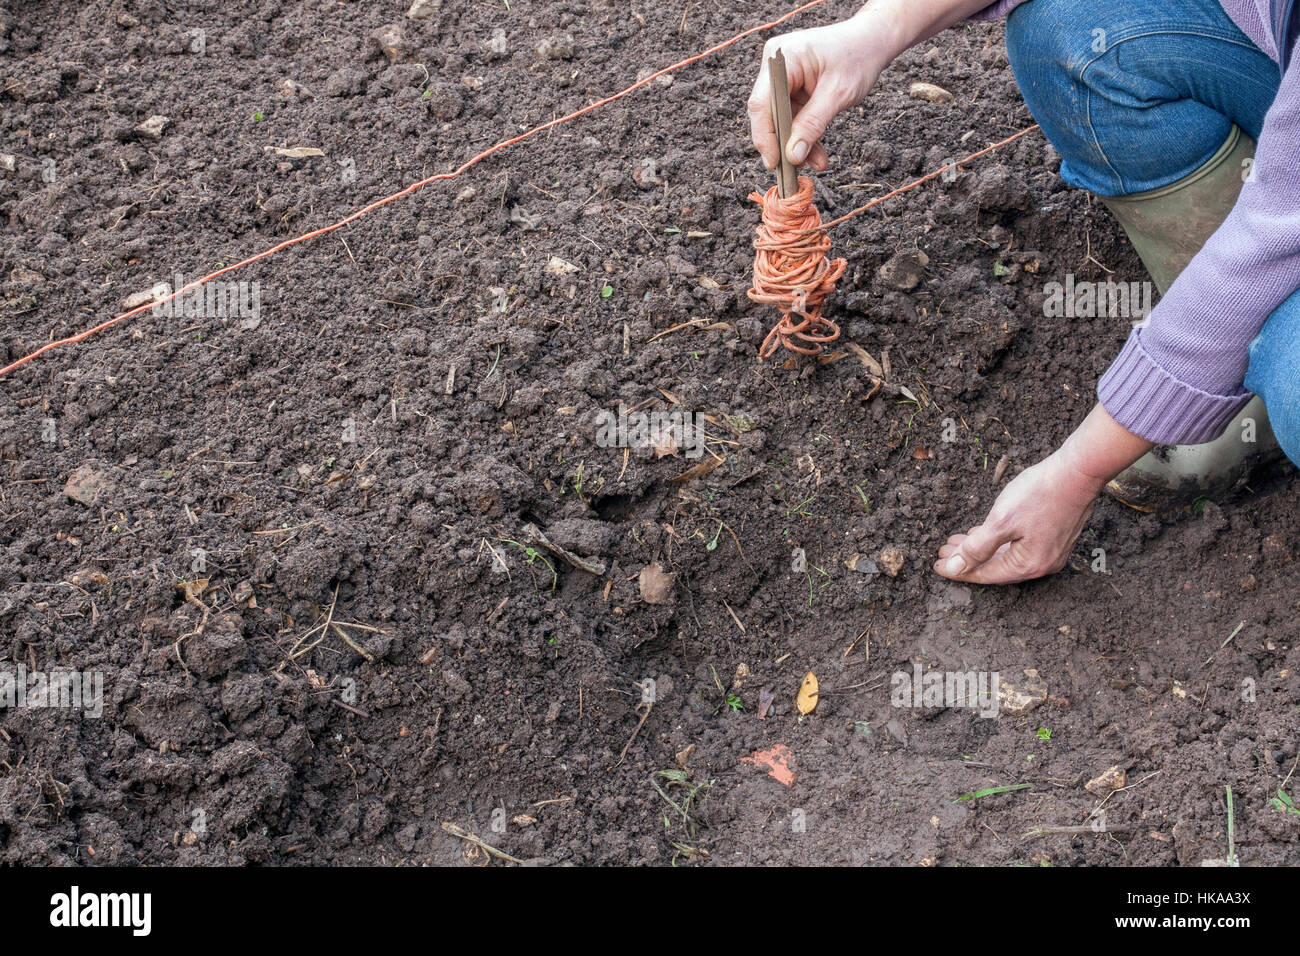 Sowing broad beans outside. Laying a line to mark edge of bed Stock Photo